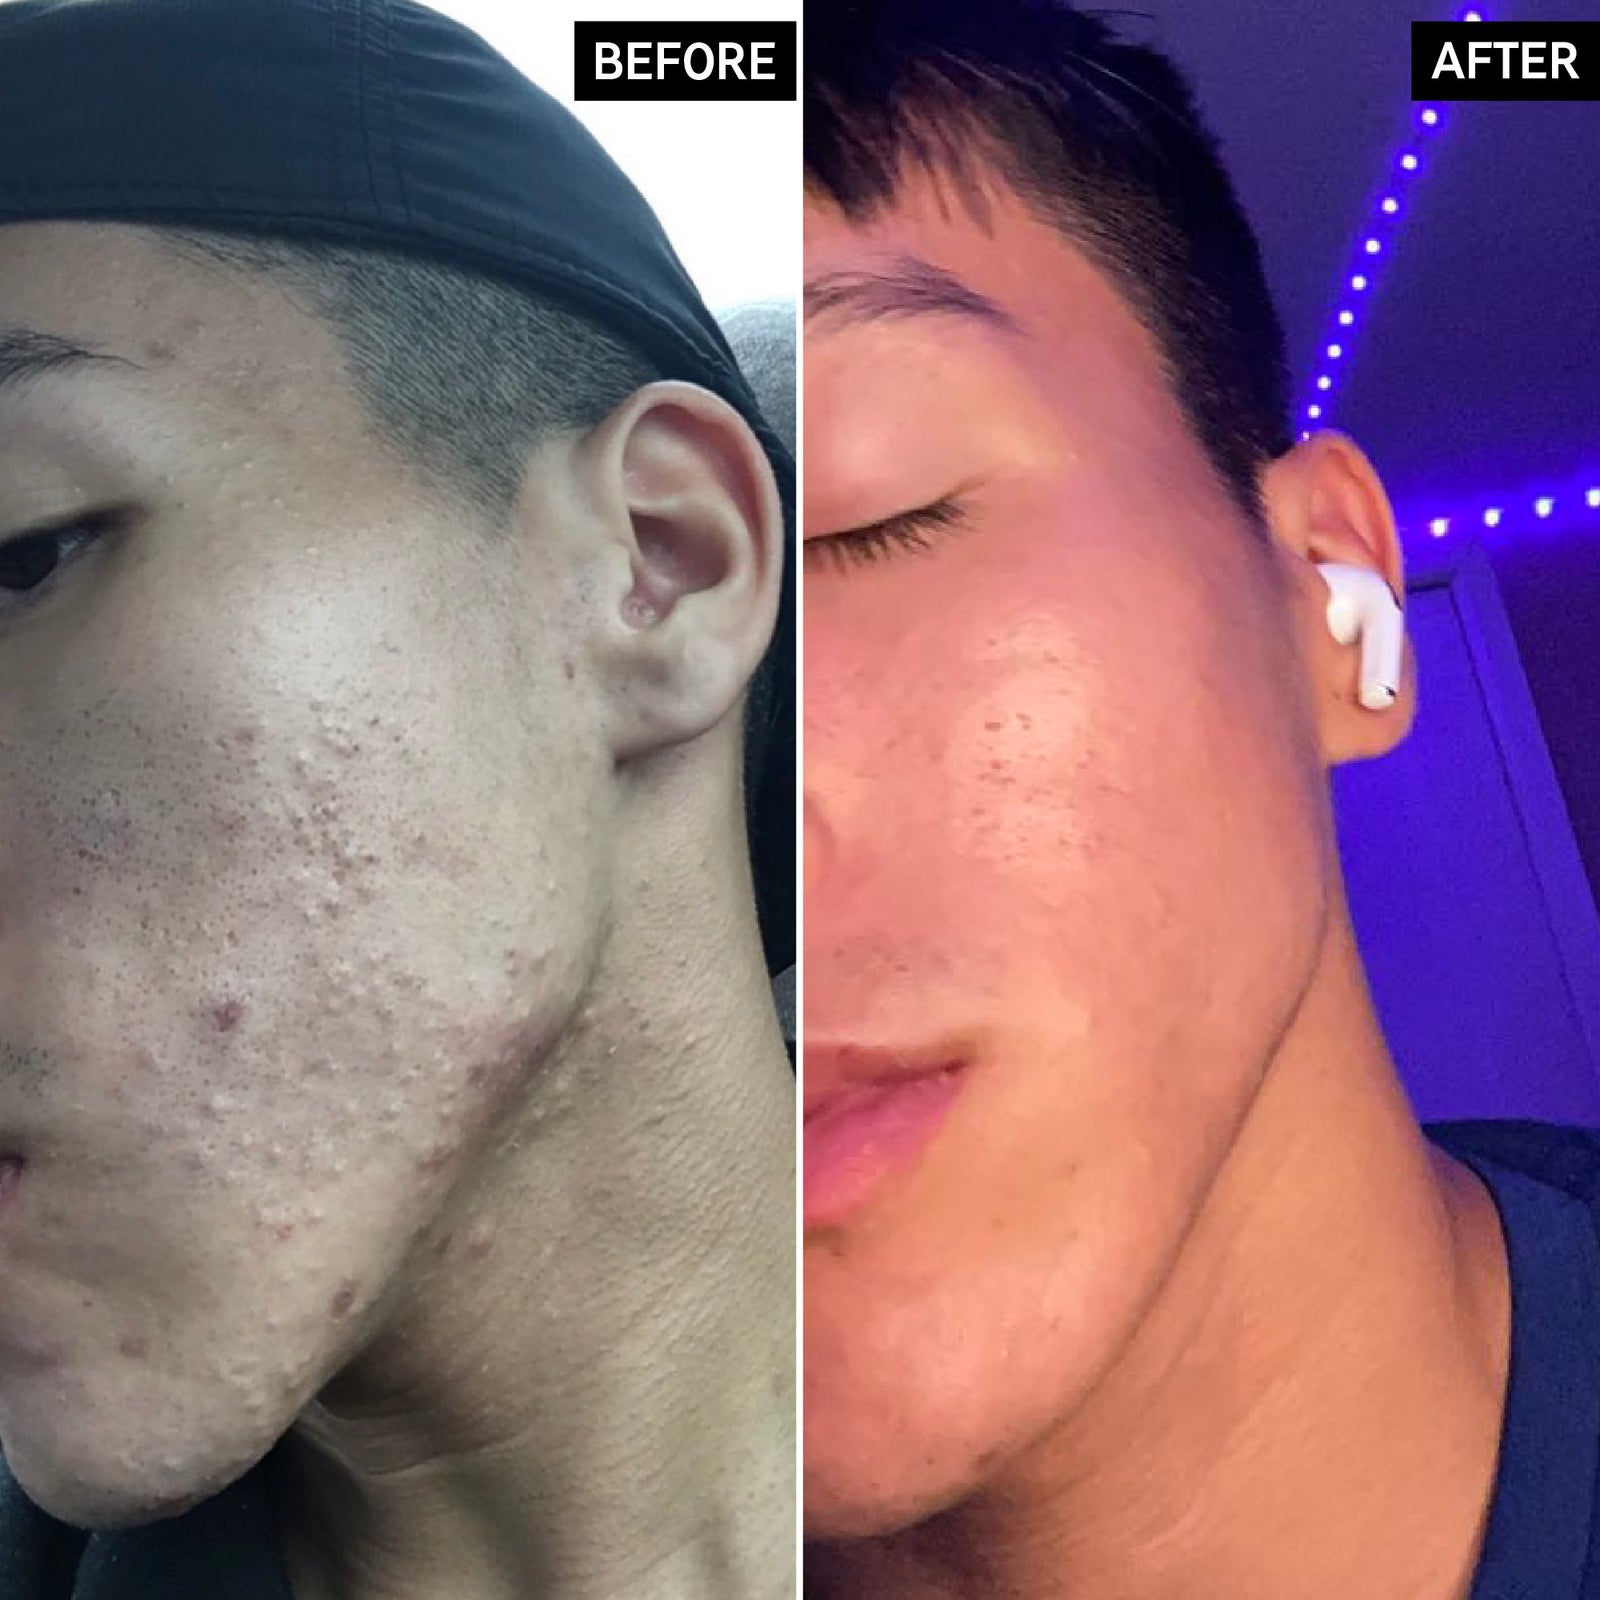 Before and after of Keanu from using the products in the Clearer Skin Cleanse Duo displaying positive results after a 3 month period